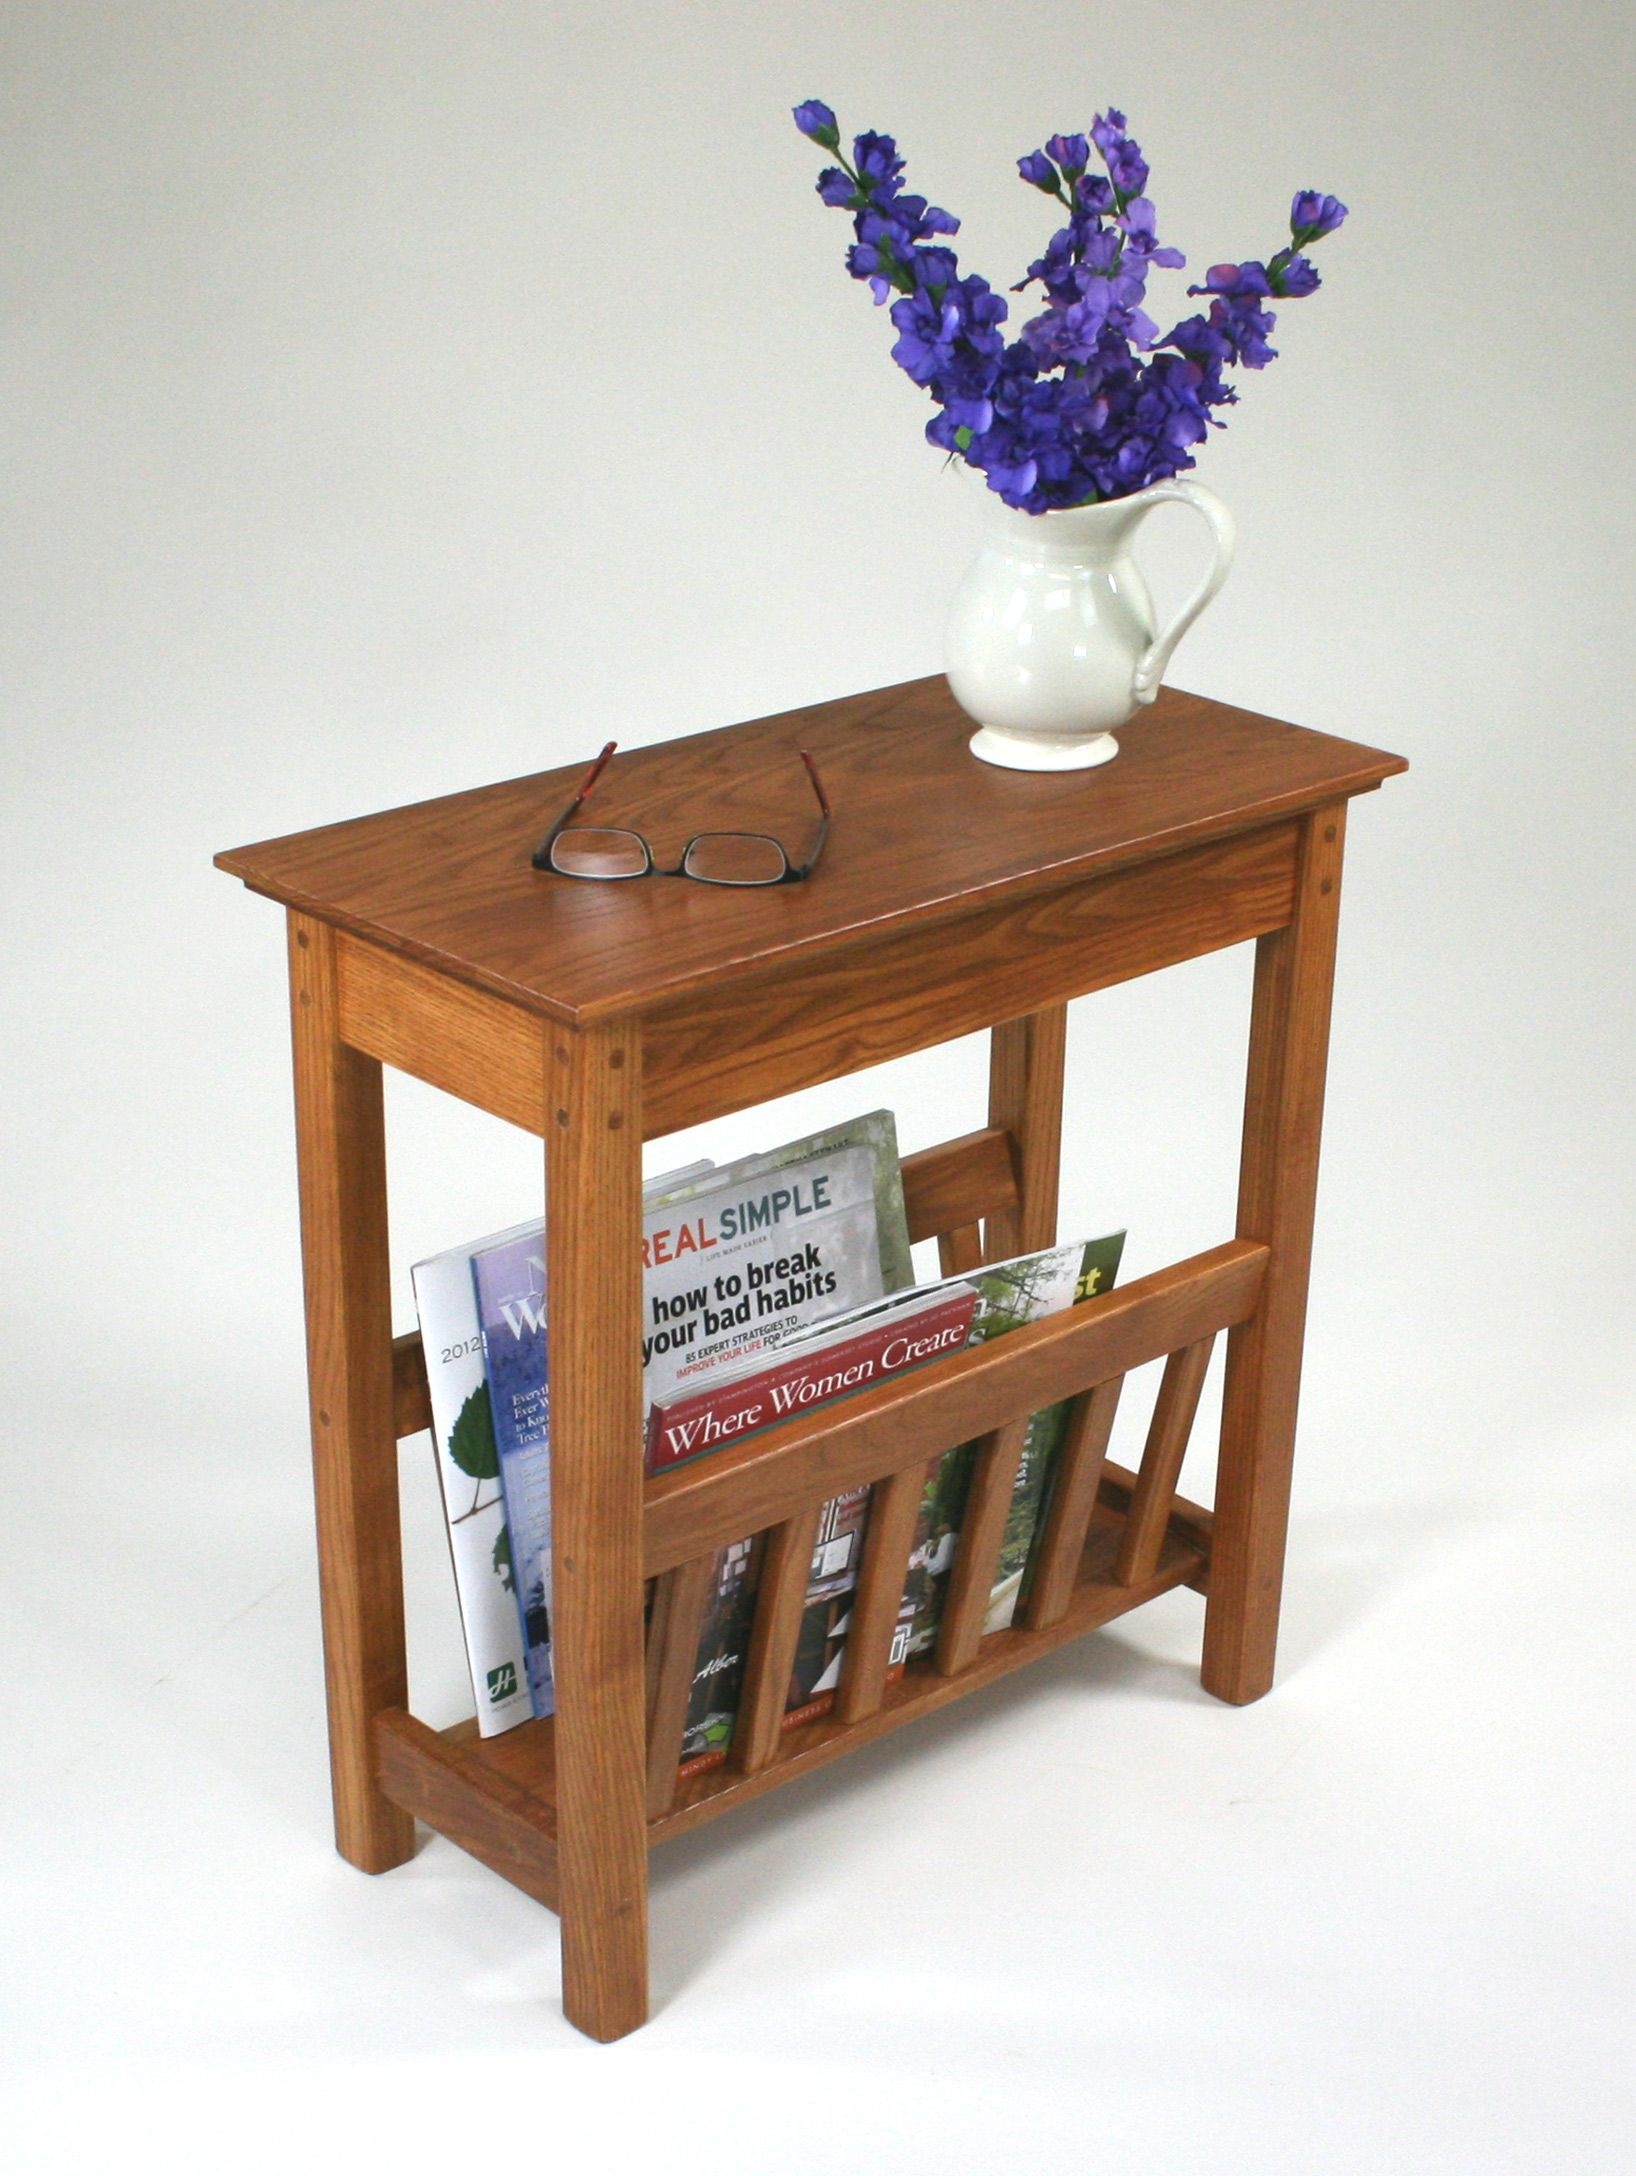 Chairside end table collection grows with chairside magazine rack